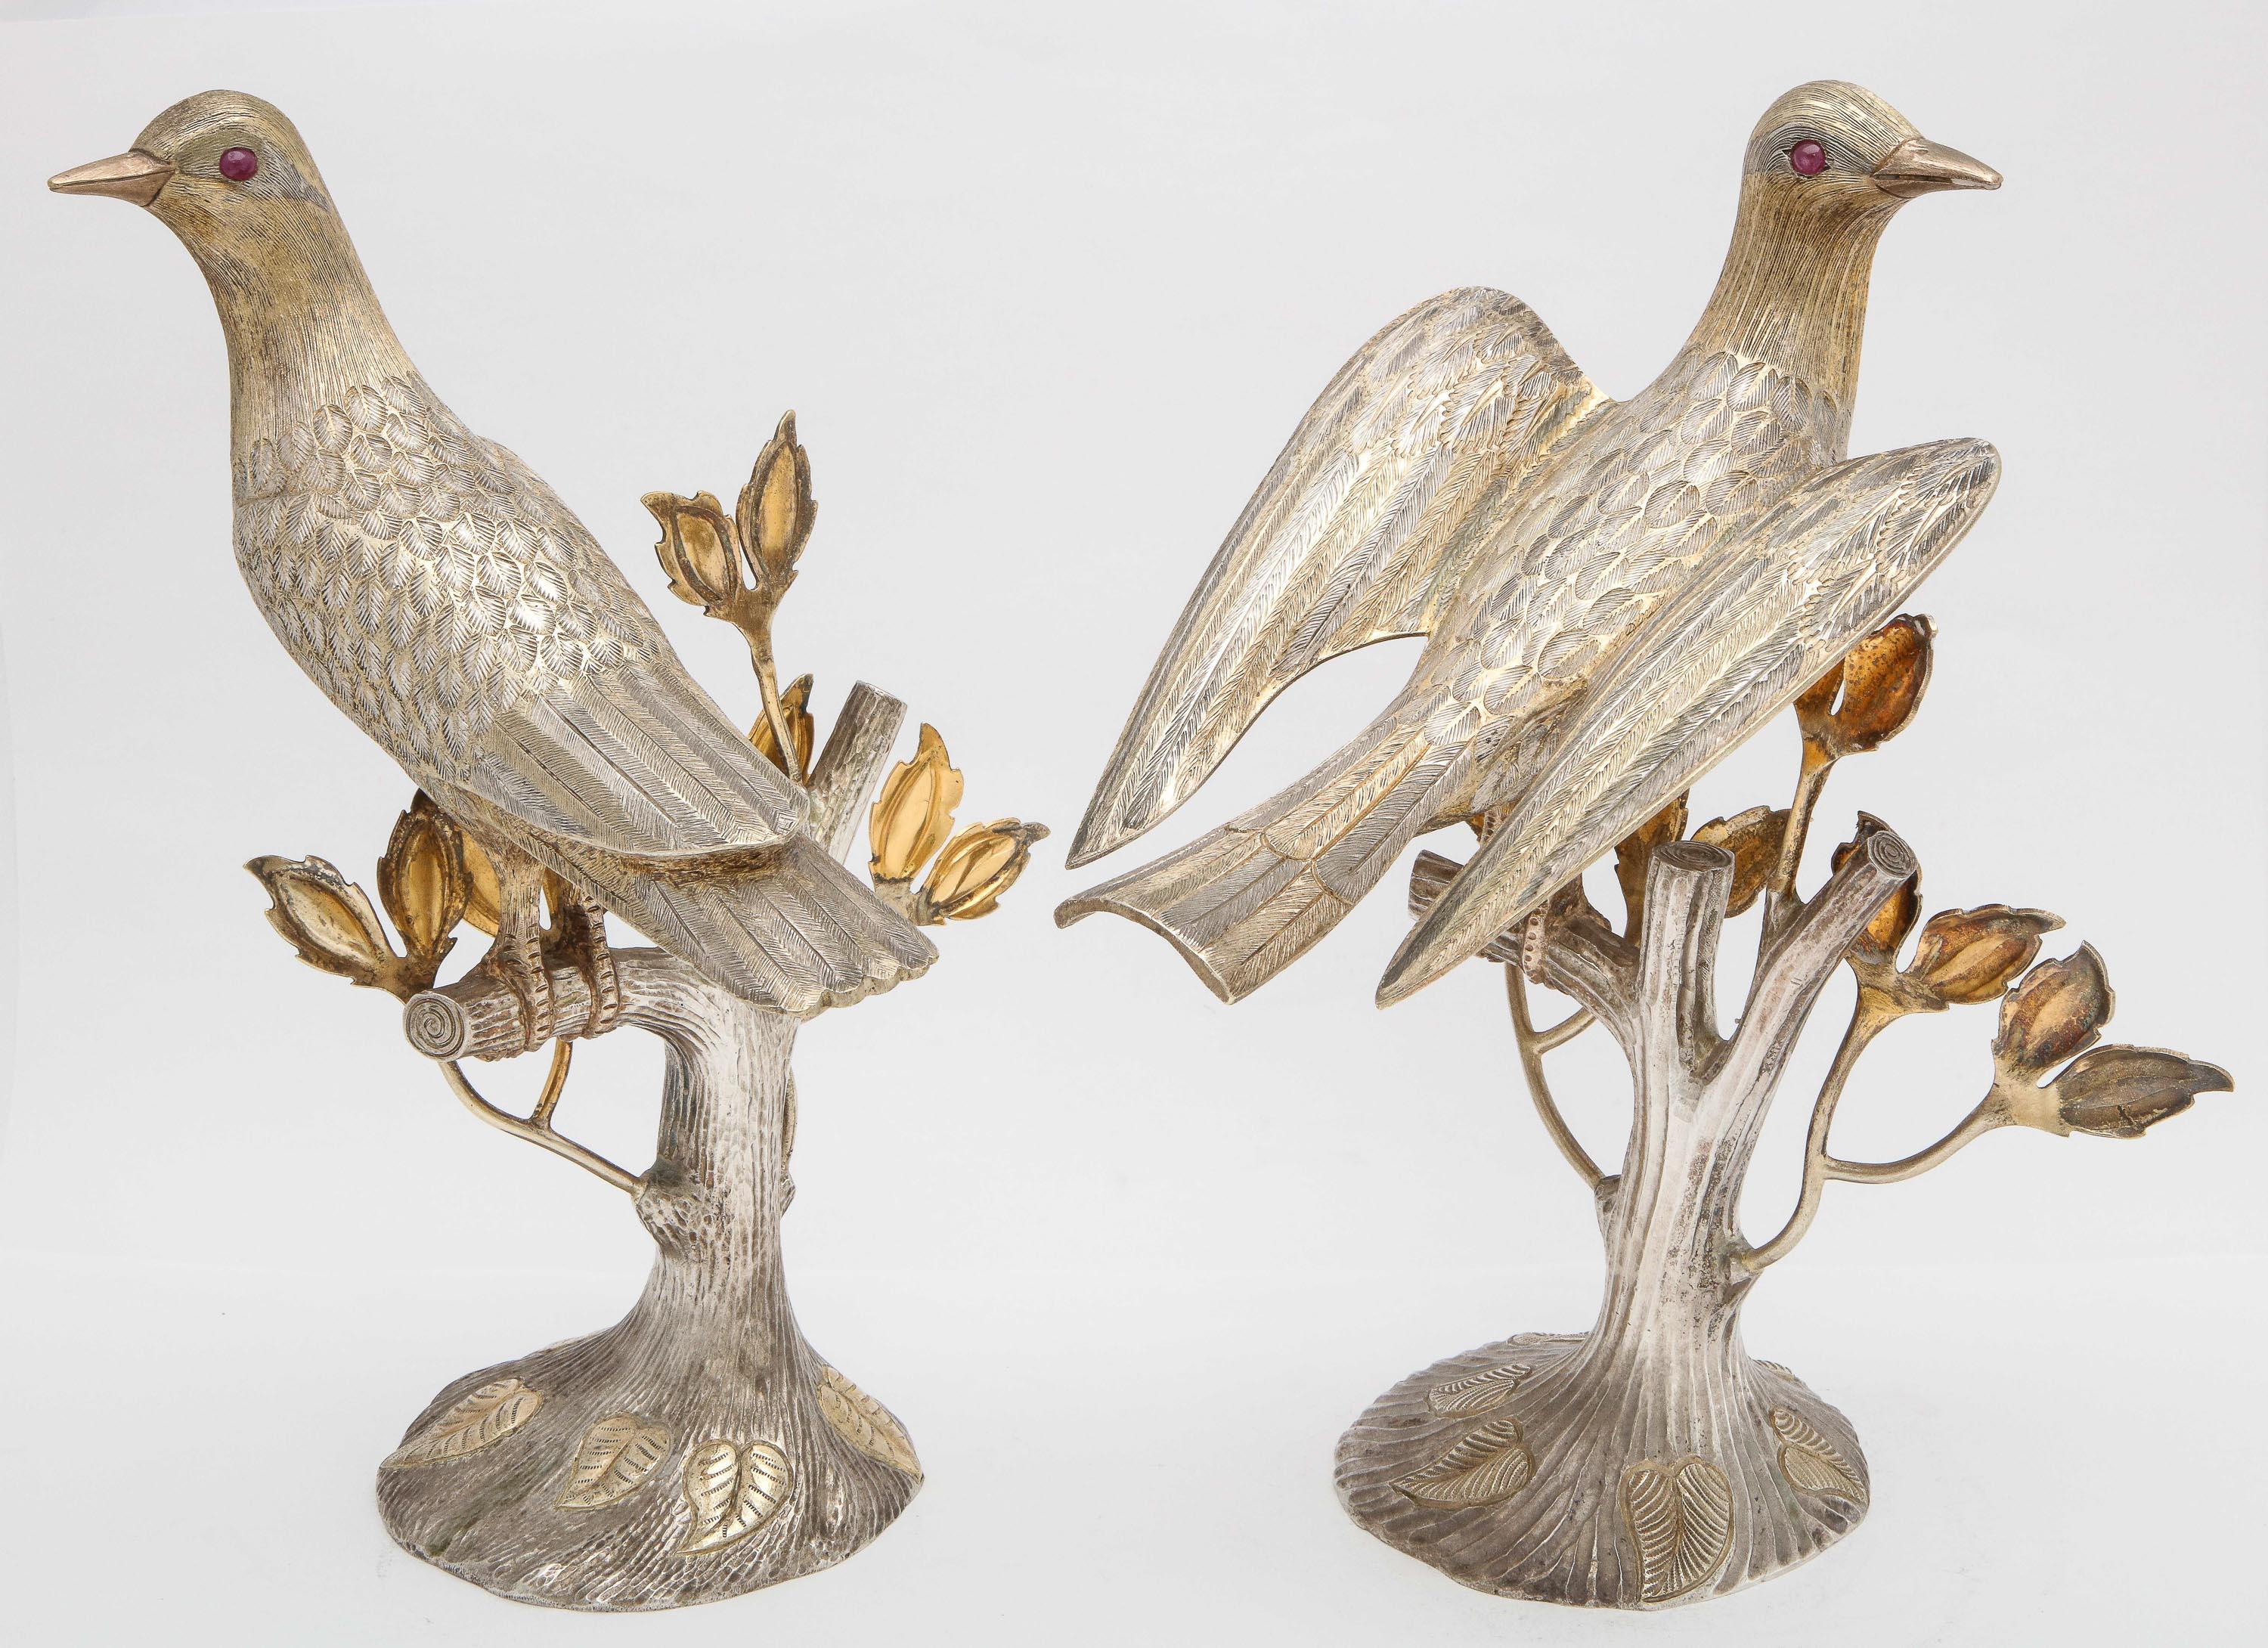 Midcentury Decorative Pair of Sterling Silver Table Birds by Tane 1